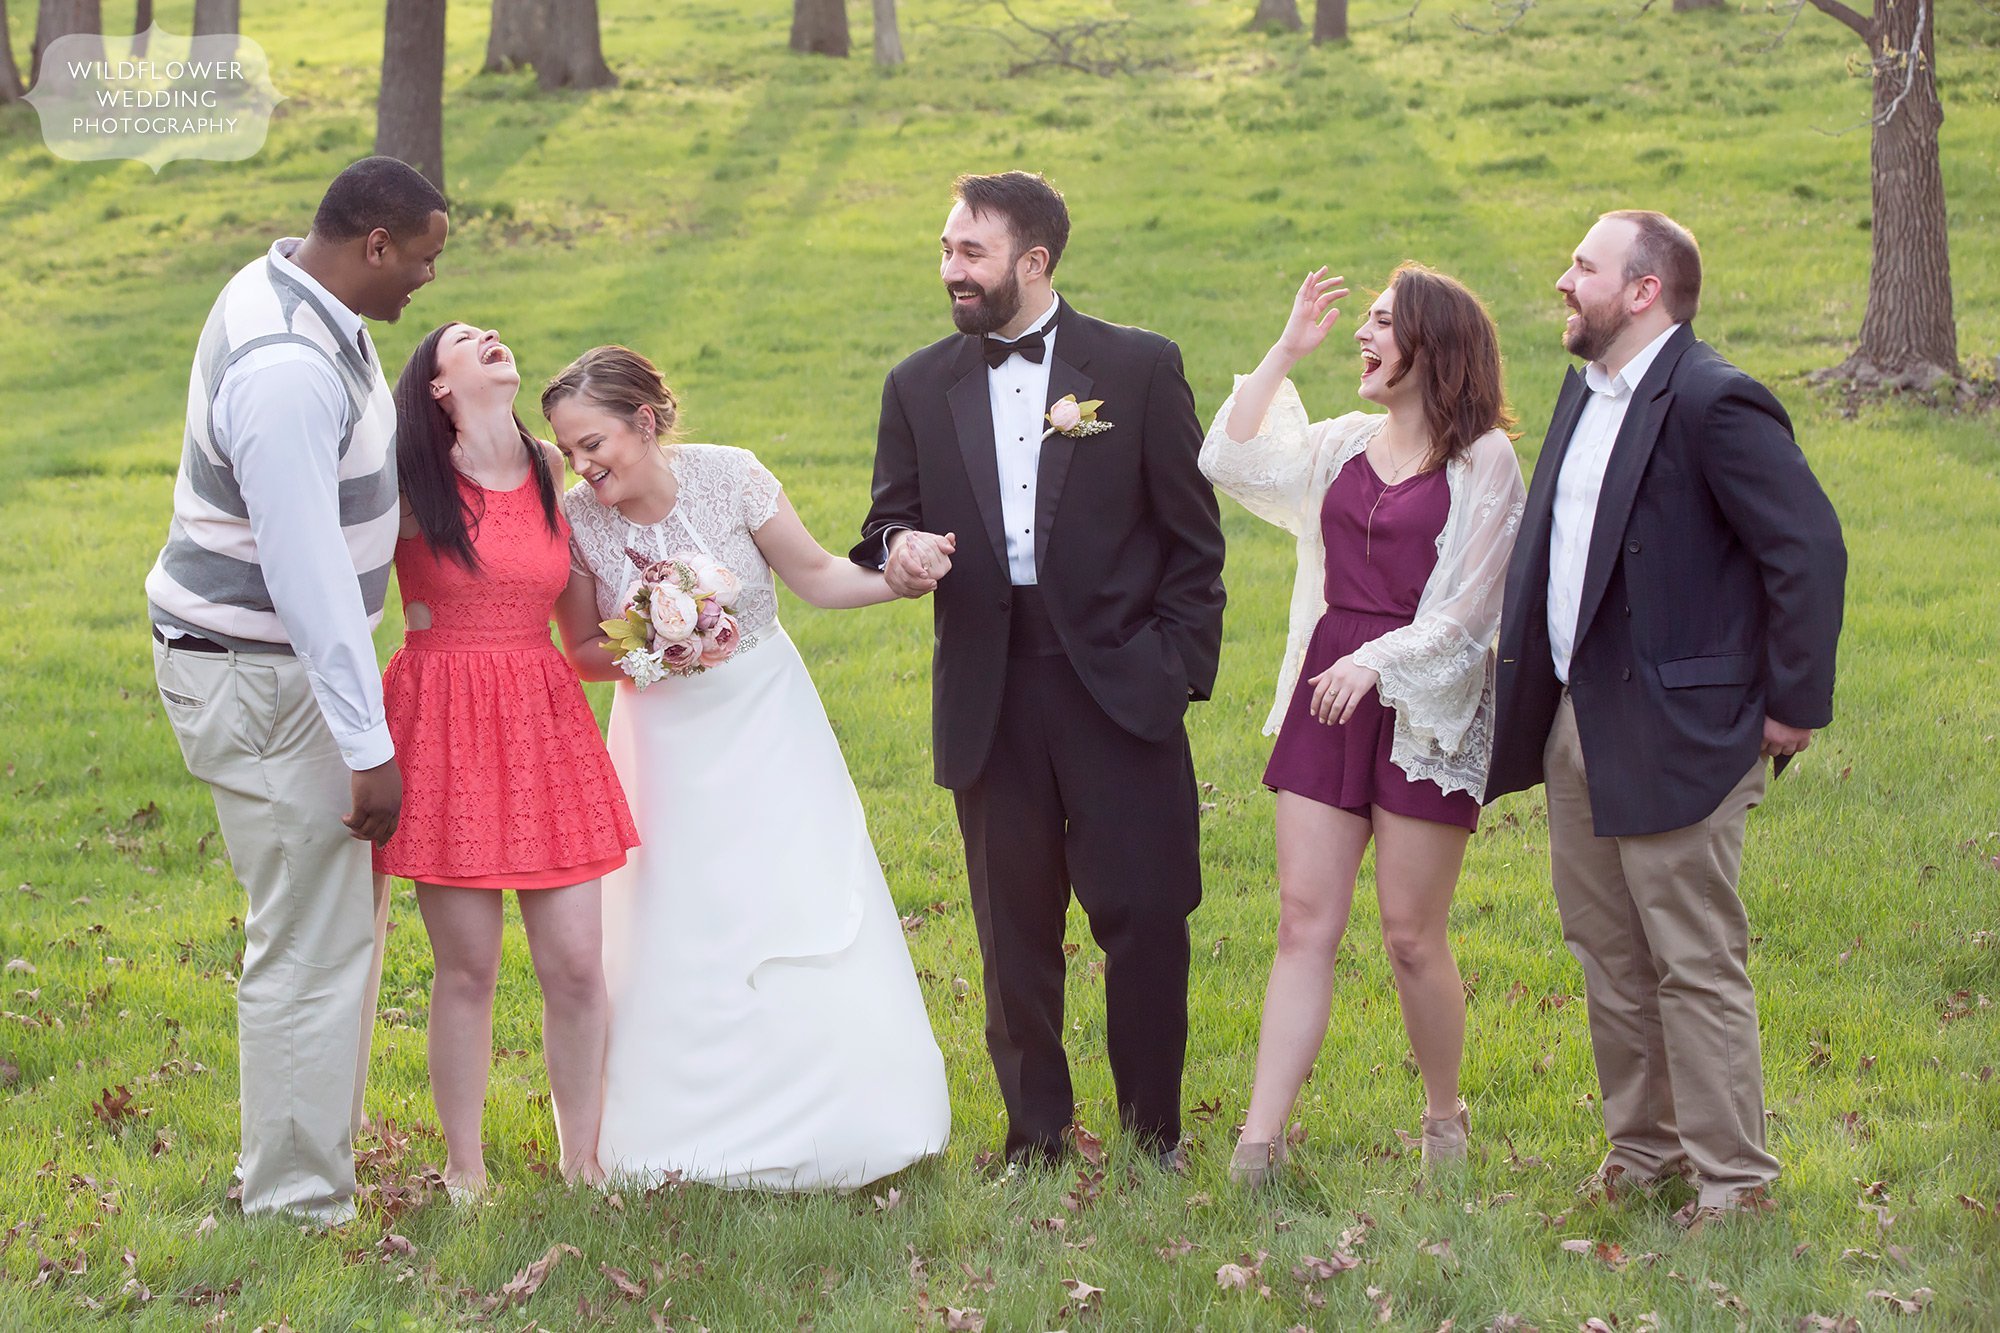 Laughing friends photo after this elopement ceremony at Nifong Park.